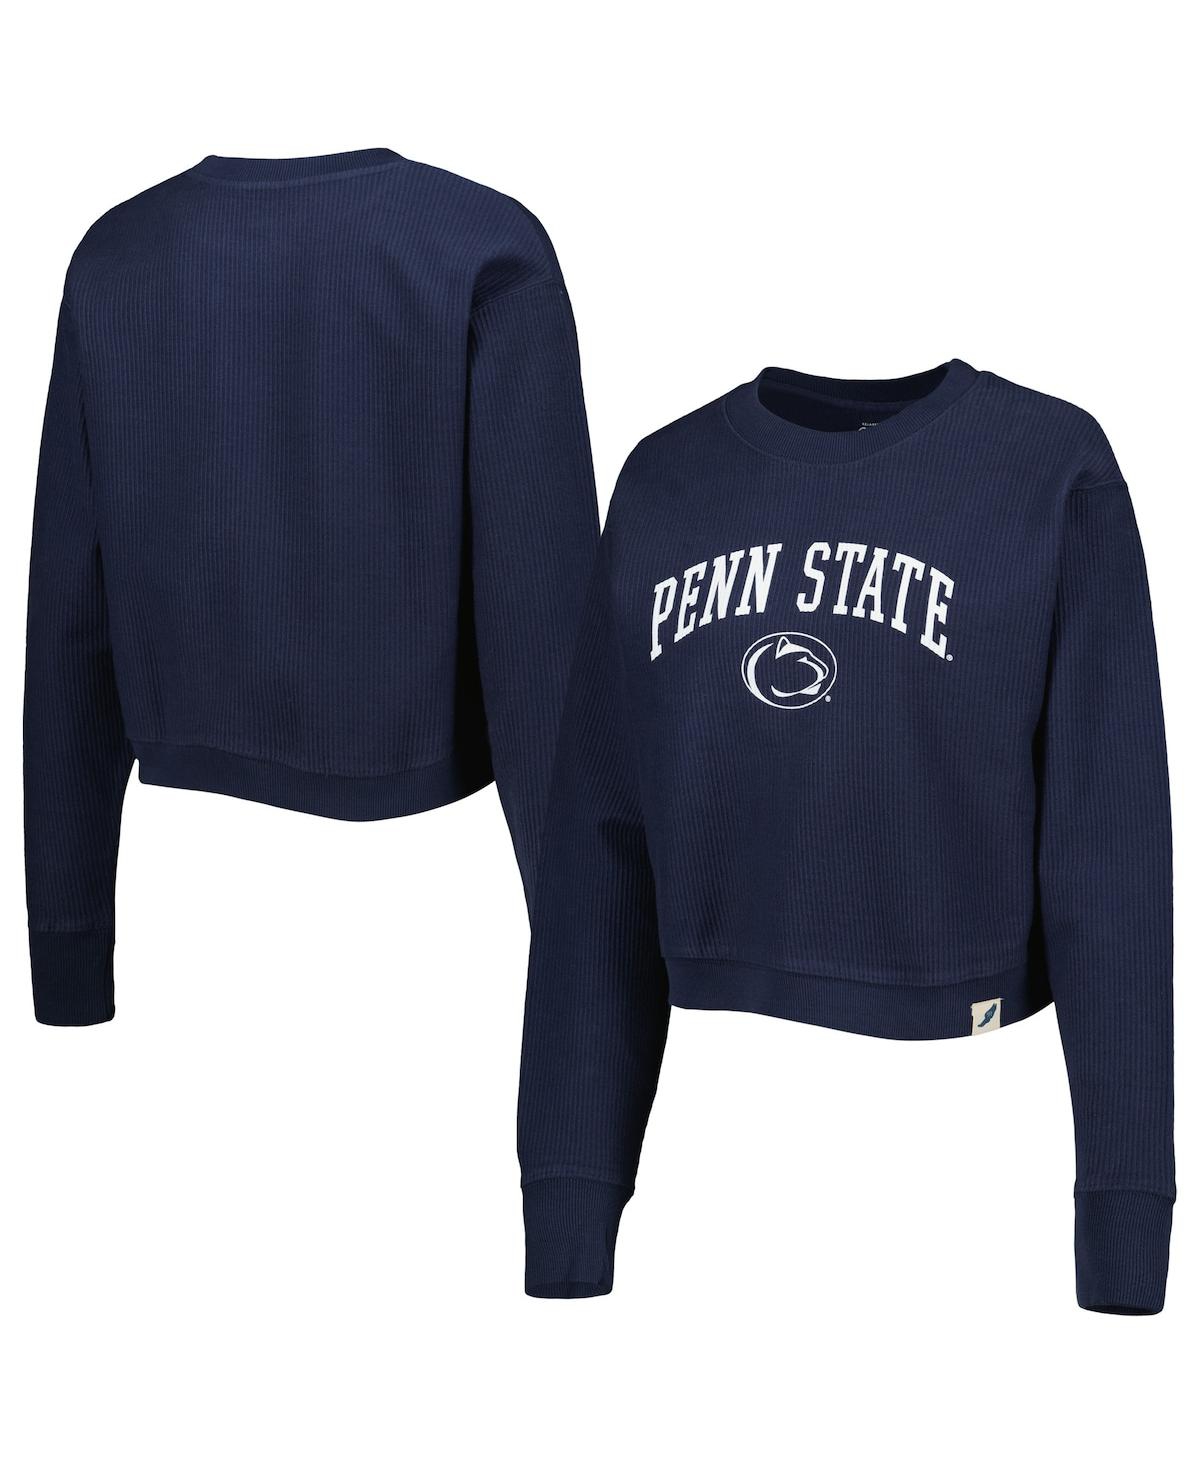 Women's League Collegiate Wear Navy Penn State Nittany Lions Classic Campus Corded Timber Sweatshirt - Navy